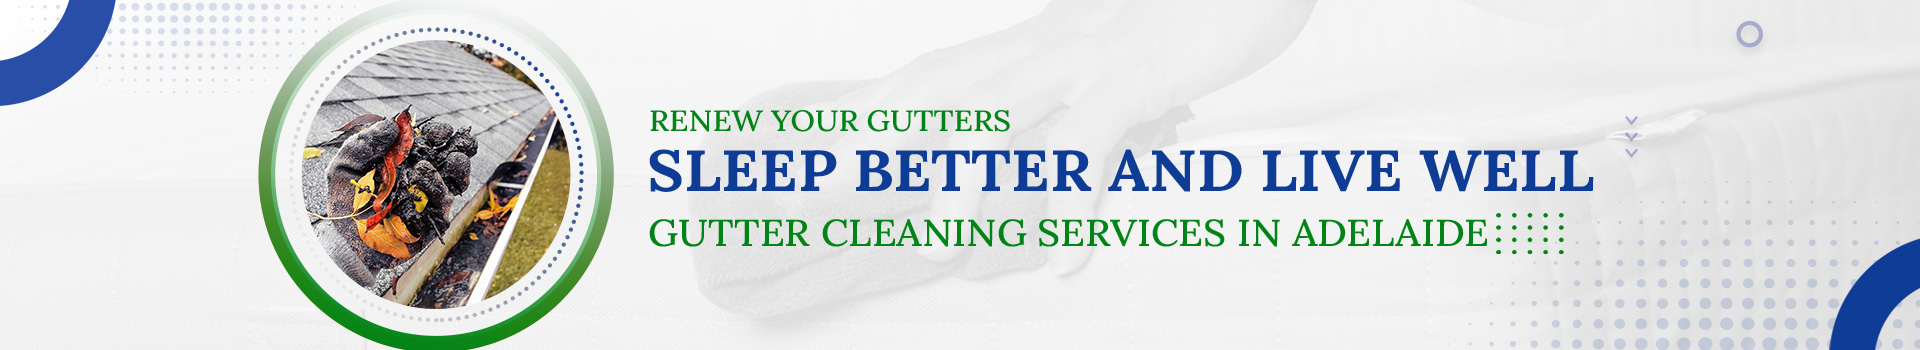 Gutter Cleaning services in Adelaide